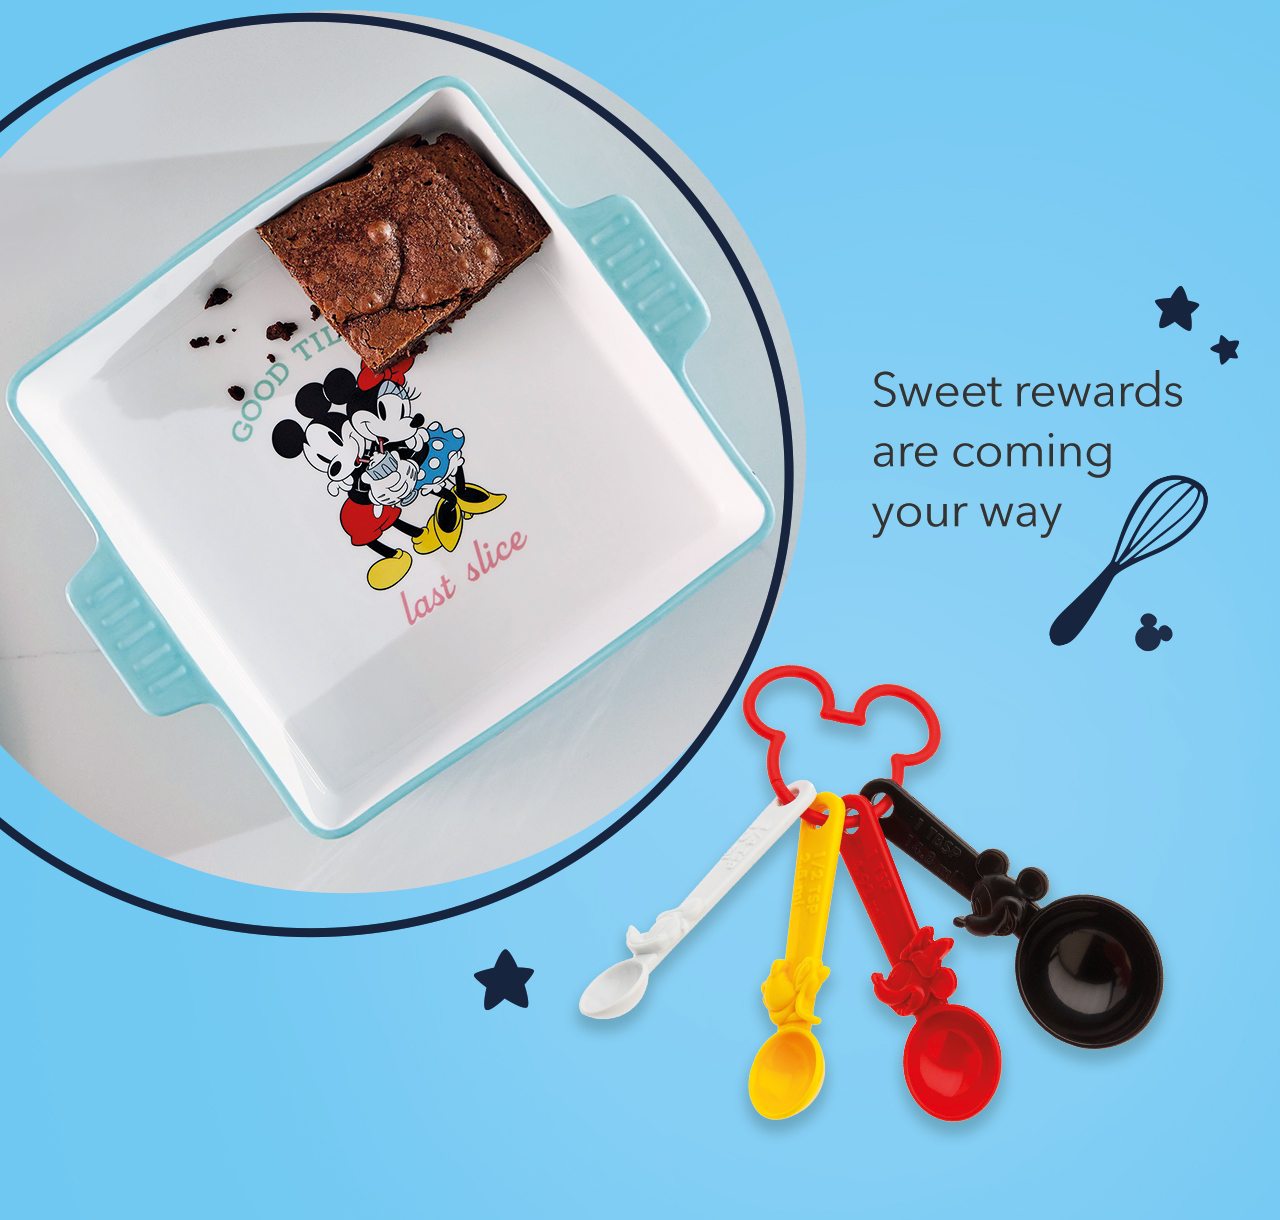 Sweet rewards are coming your way. | Shop Now